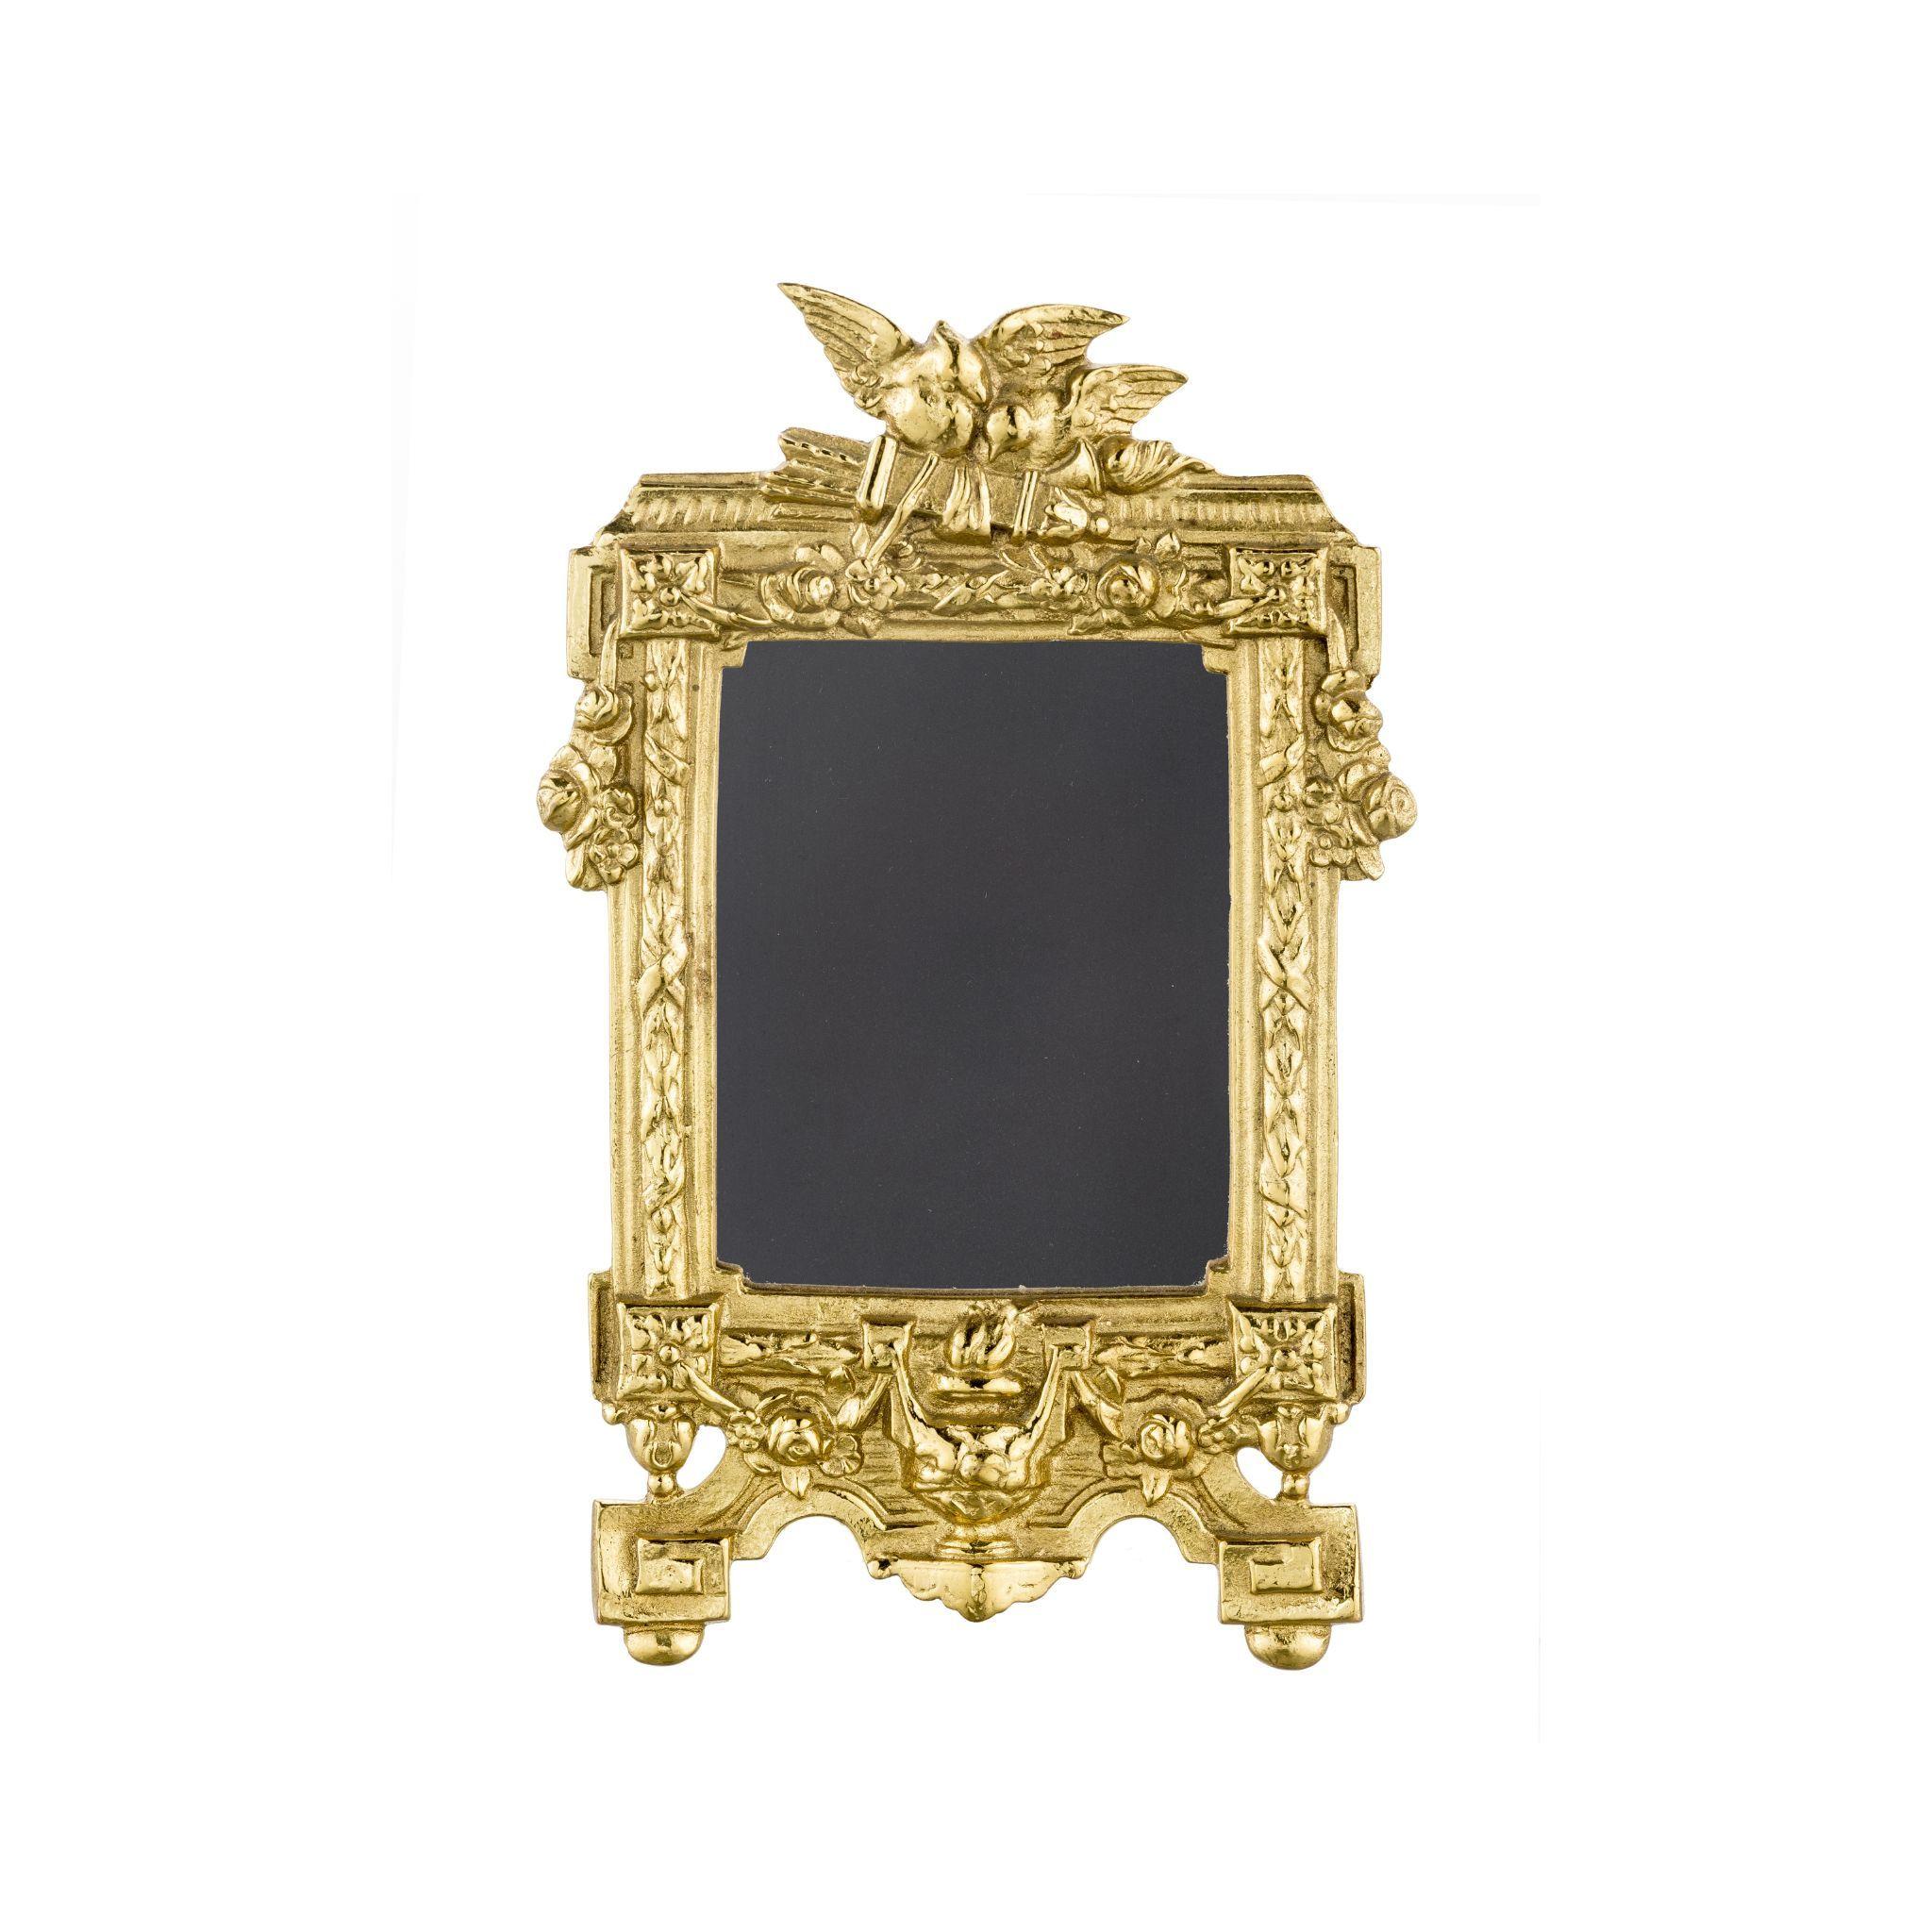 Display your cherished memories in our elegant square brass frame with garland and doves. Crafted from high-quality brass, this unique frame features a stunning garland and doves design that adds a touch of romance and sophistication to any room.